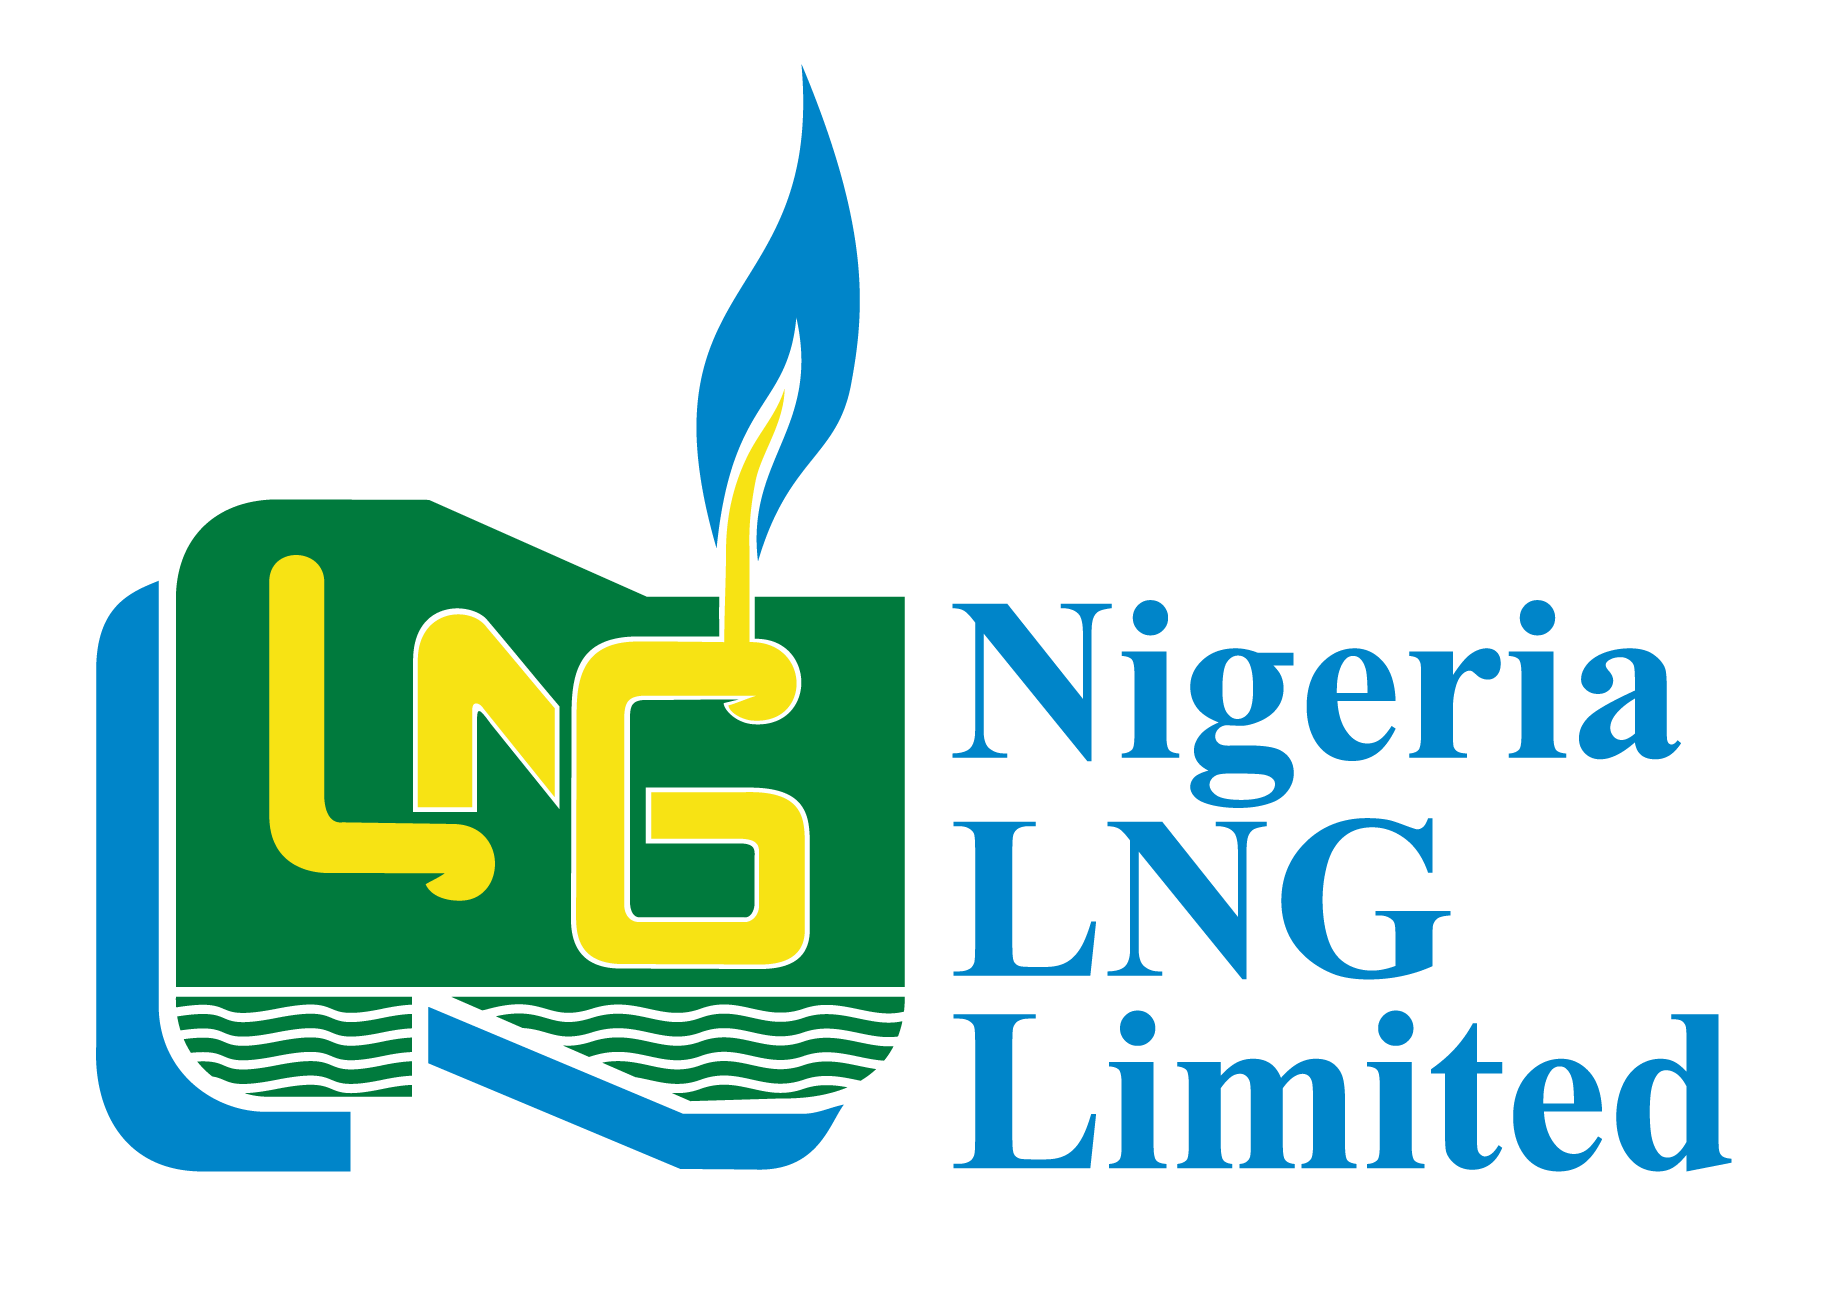 NLNG seeks more investments to ensure reliable LPG supply